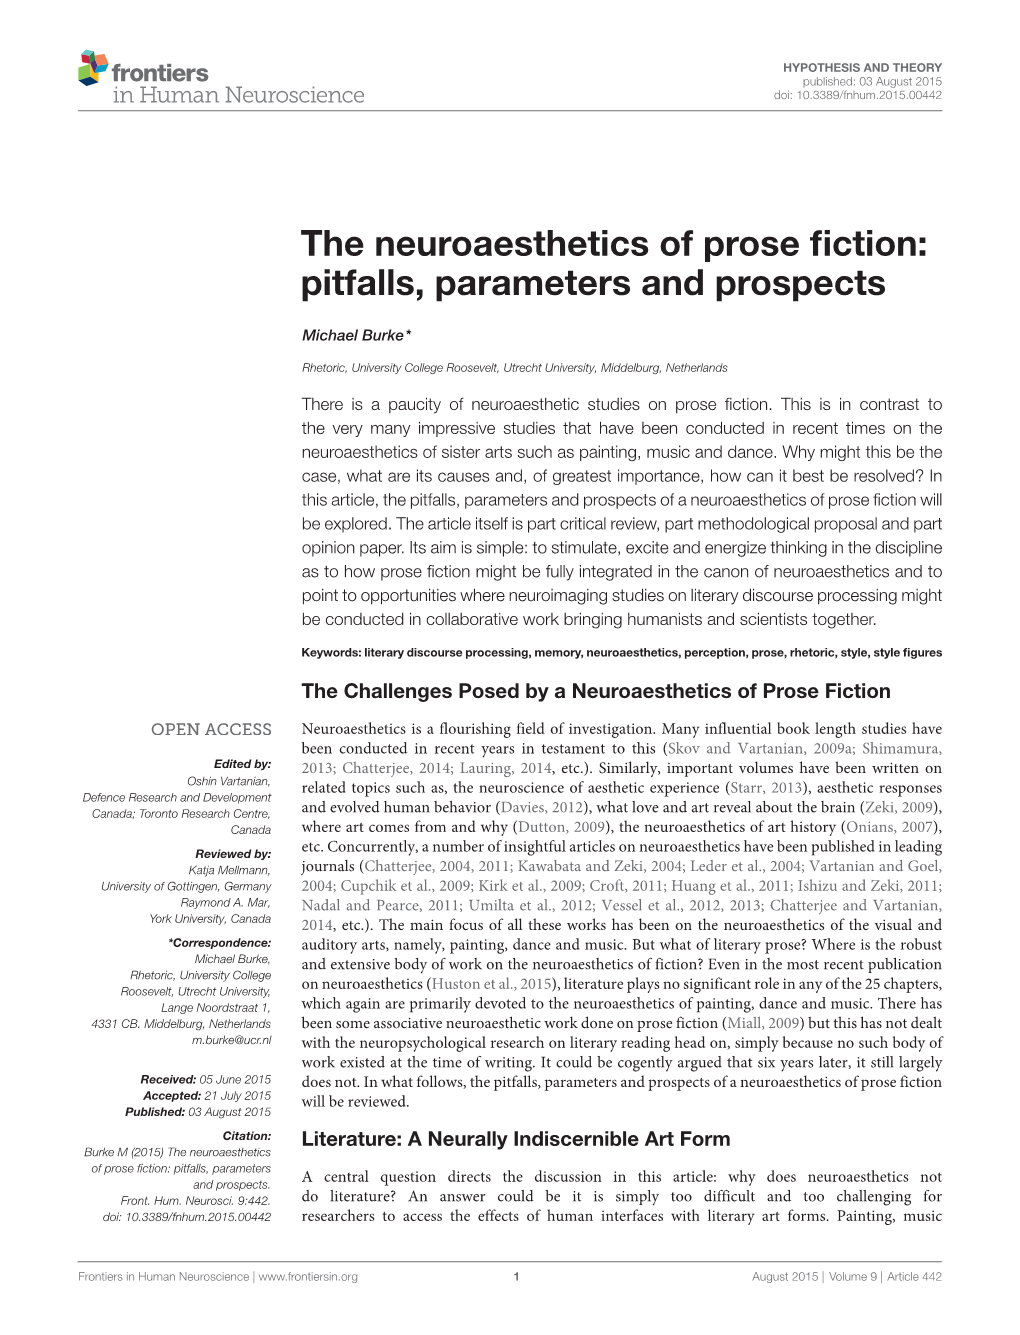 The Neuroaesthetics of Prose Fiction: Pitfalls, Parameters and Prospects